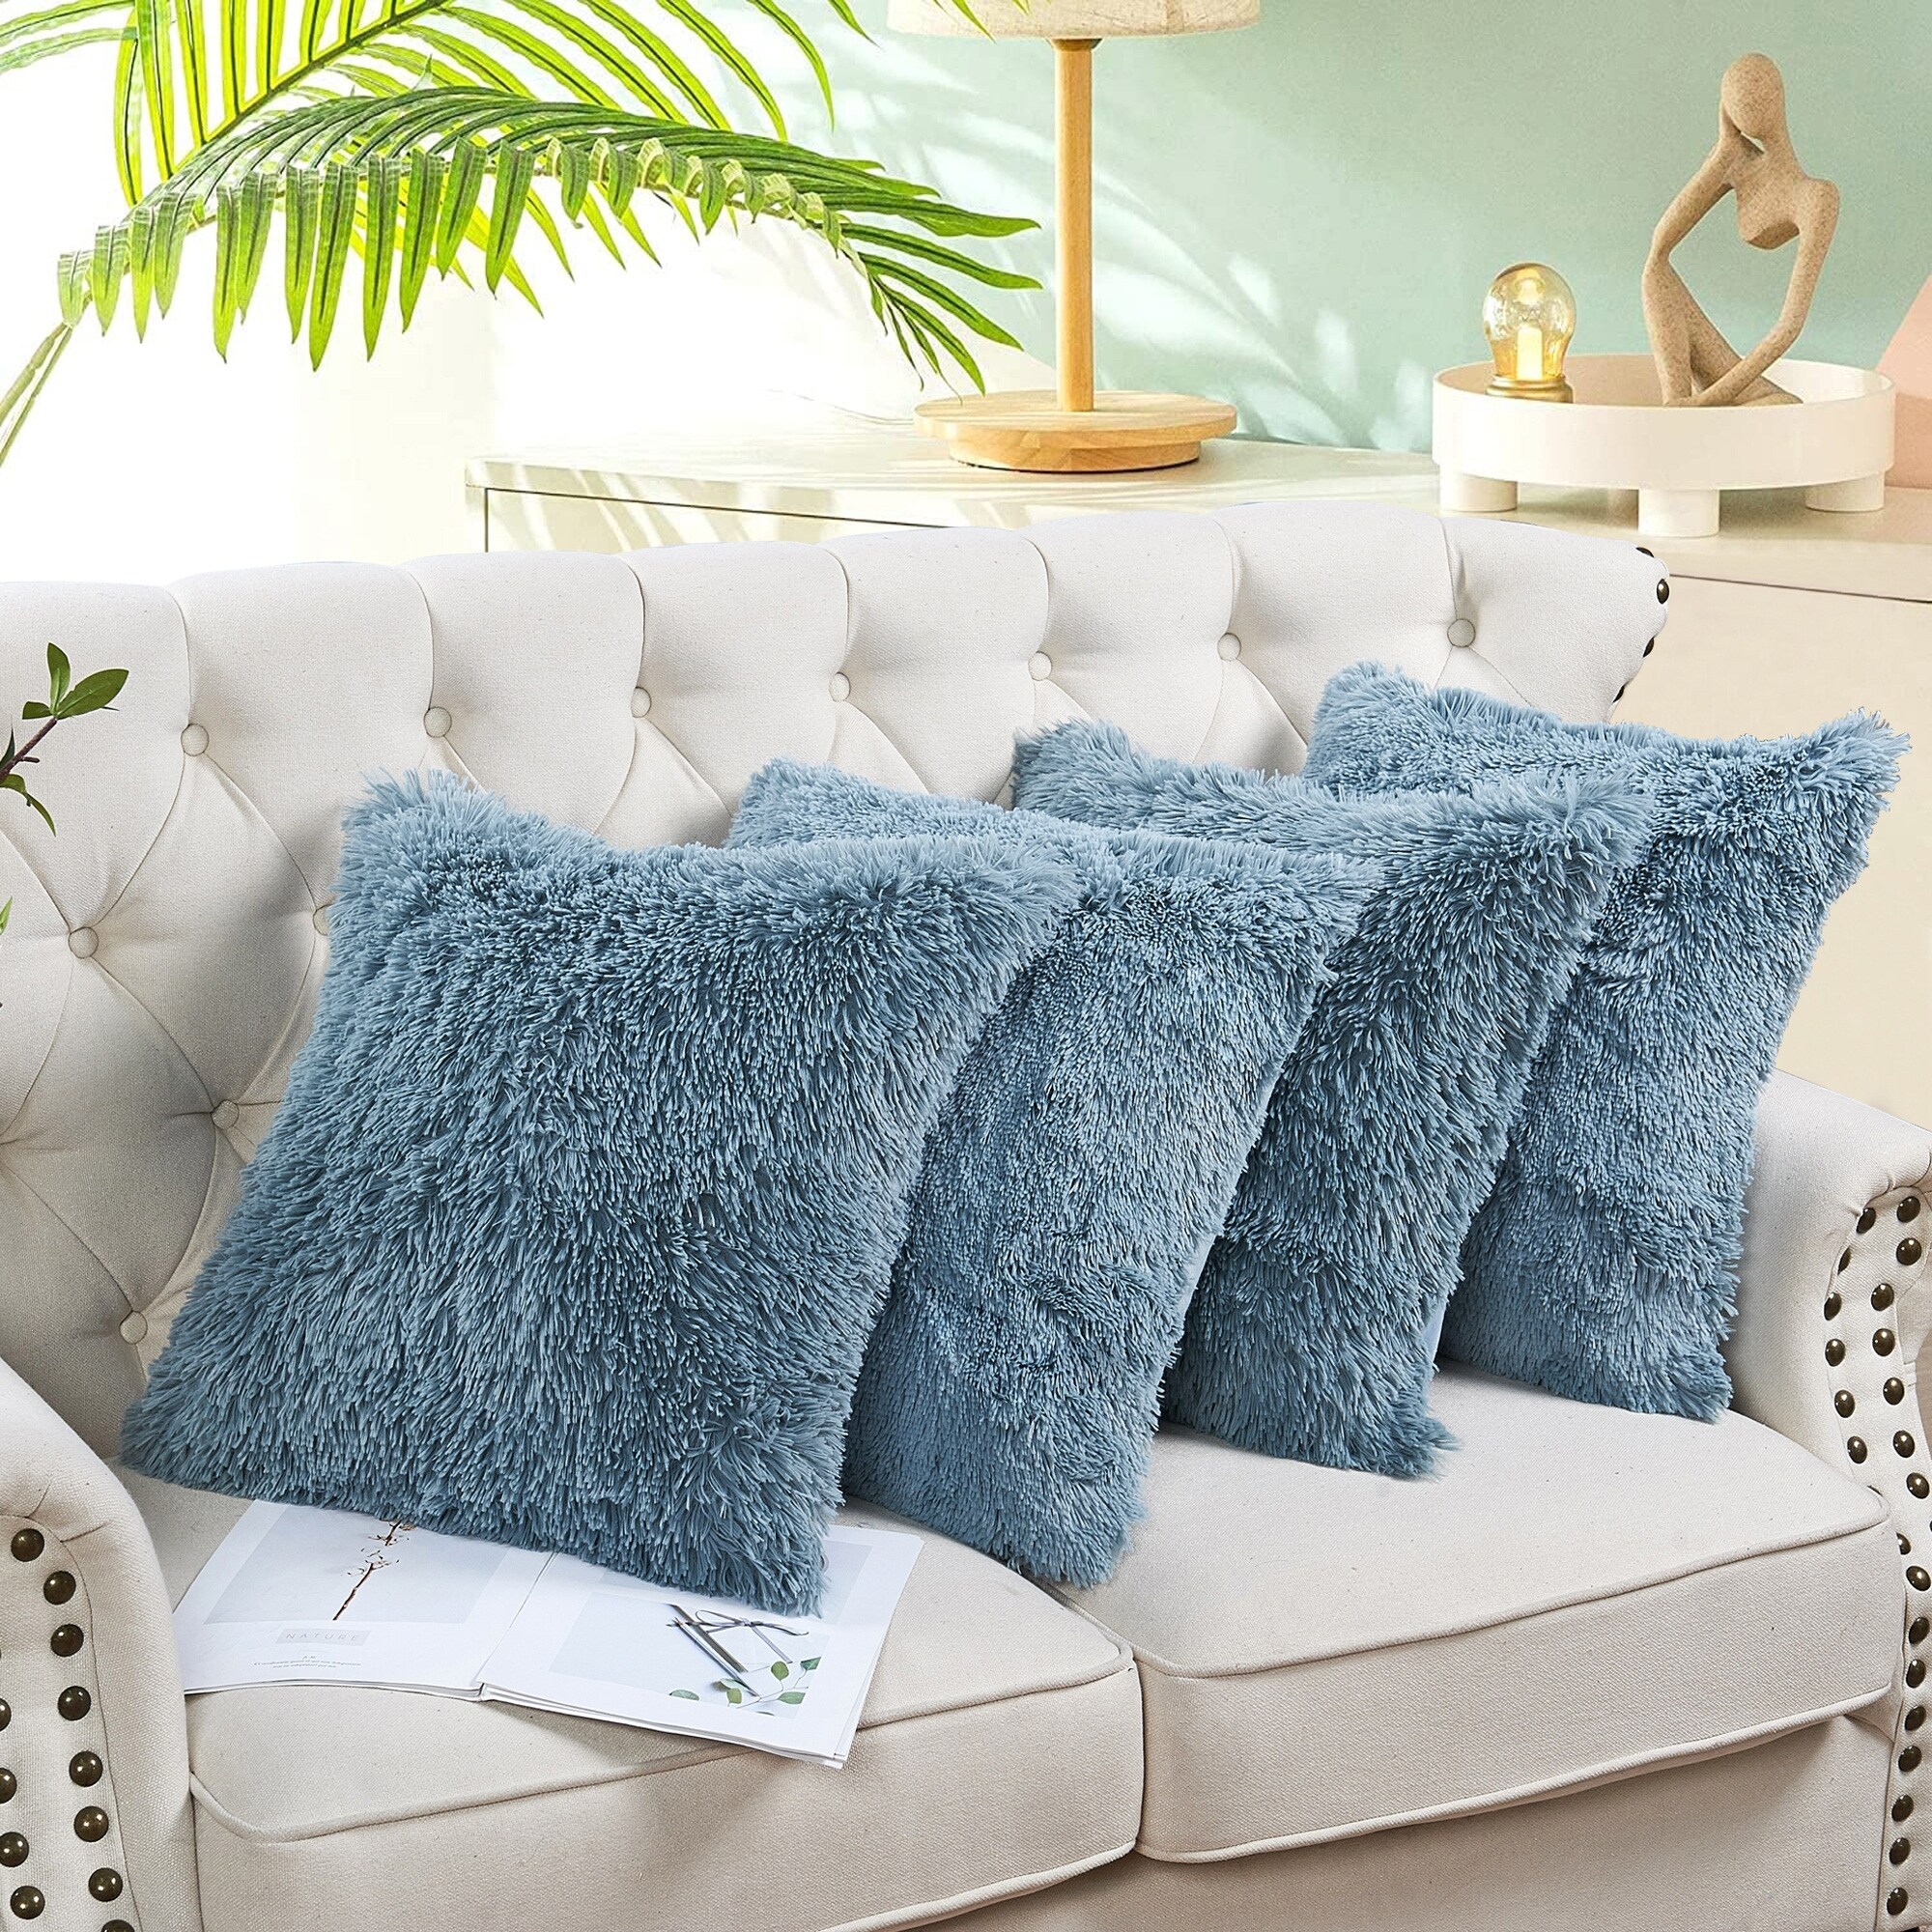 https://ak1.ostkcdn.com/images/products/is/images/direct/a41513682b7ab10a59e416844d19007fb96568a0/Halsted-Shaggy-FauxFur-Decorative-Throw-Pillow-Cover-Set%2C-NO-INSERT.jpg